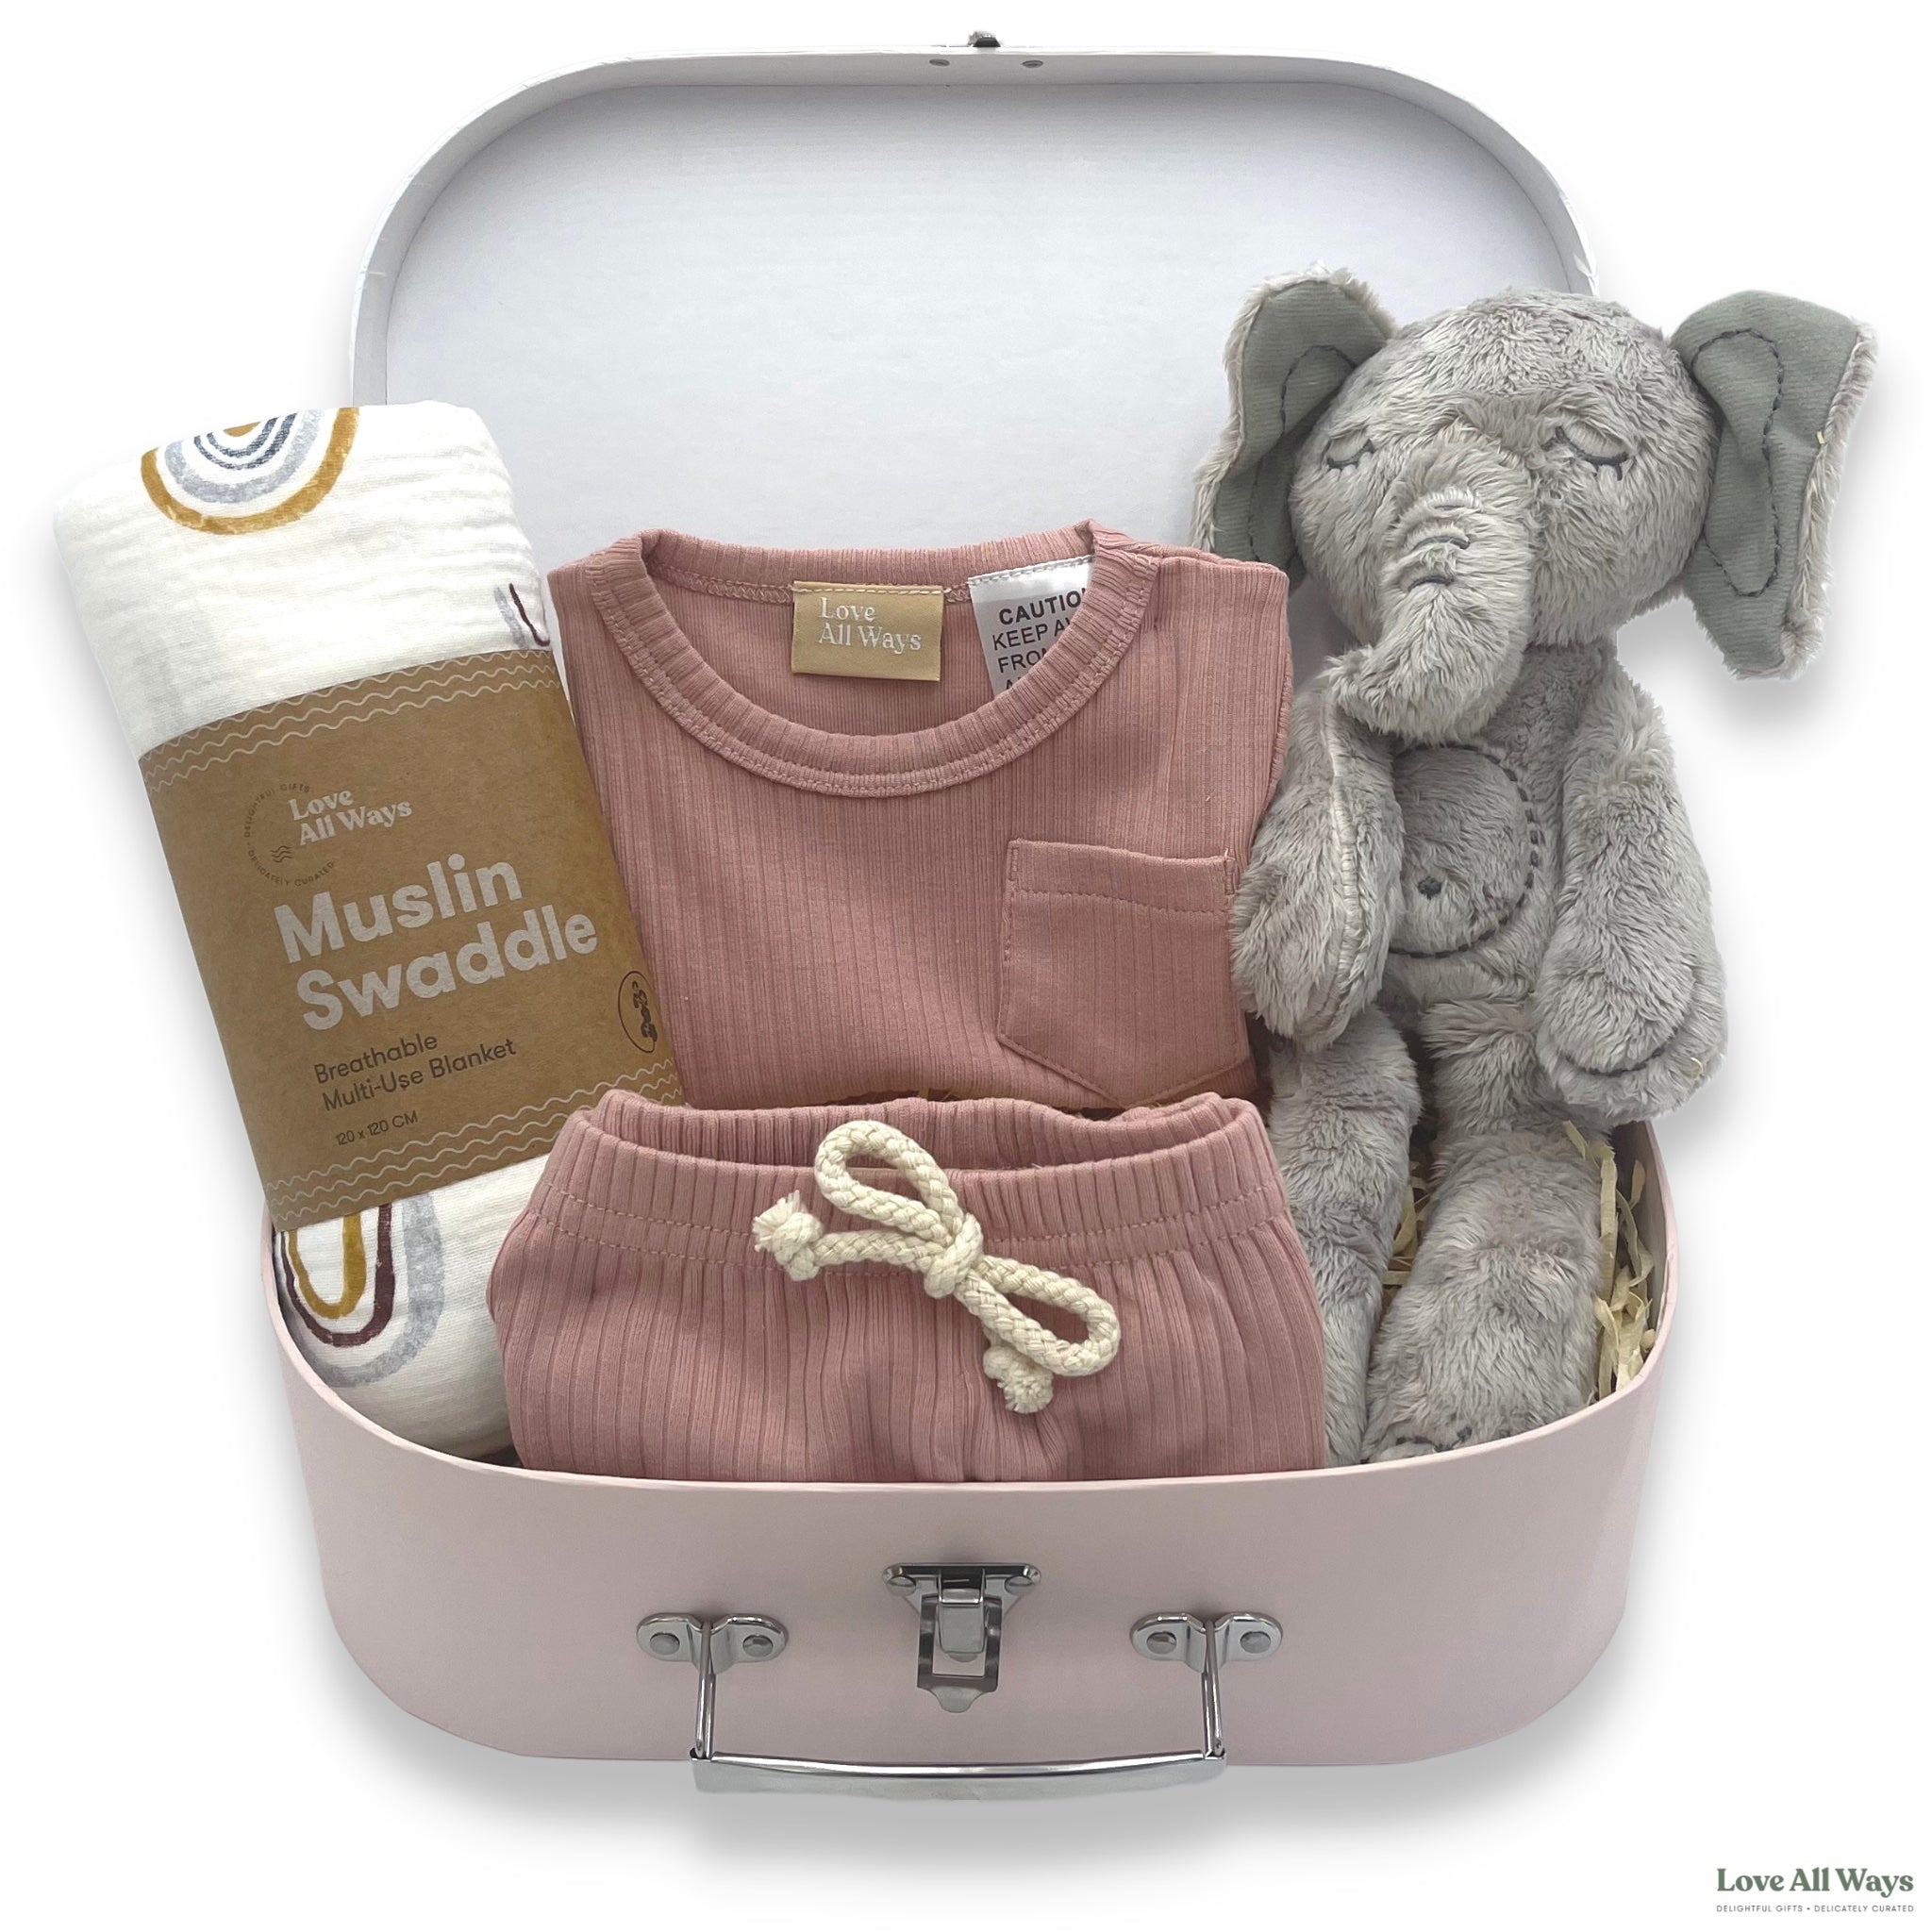 Baby Girl organic gift hamper inspired by a summer loungewear the perfect gift for that someone special or new baby gift. FREE DELIVERY Australia Wide.